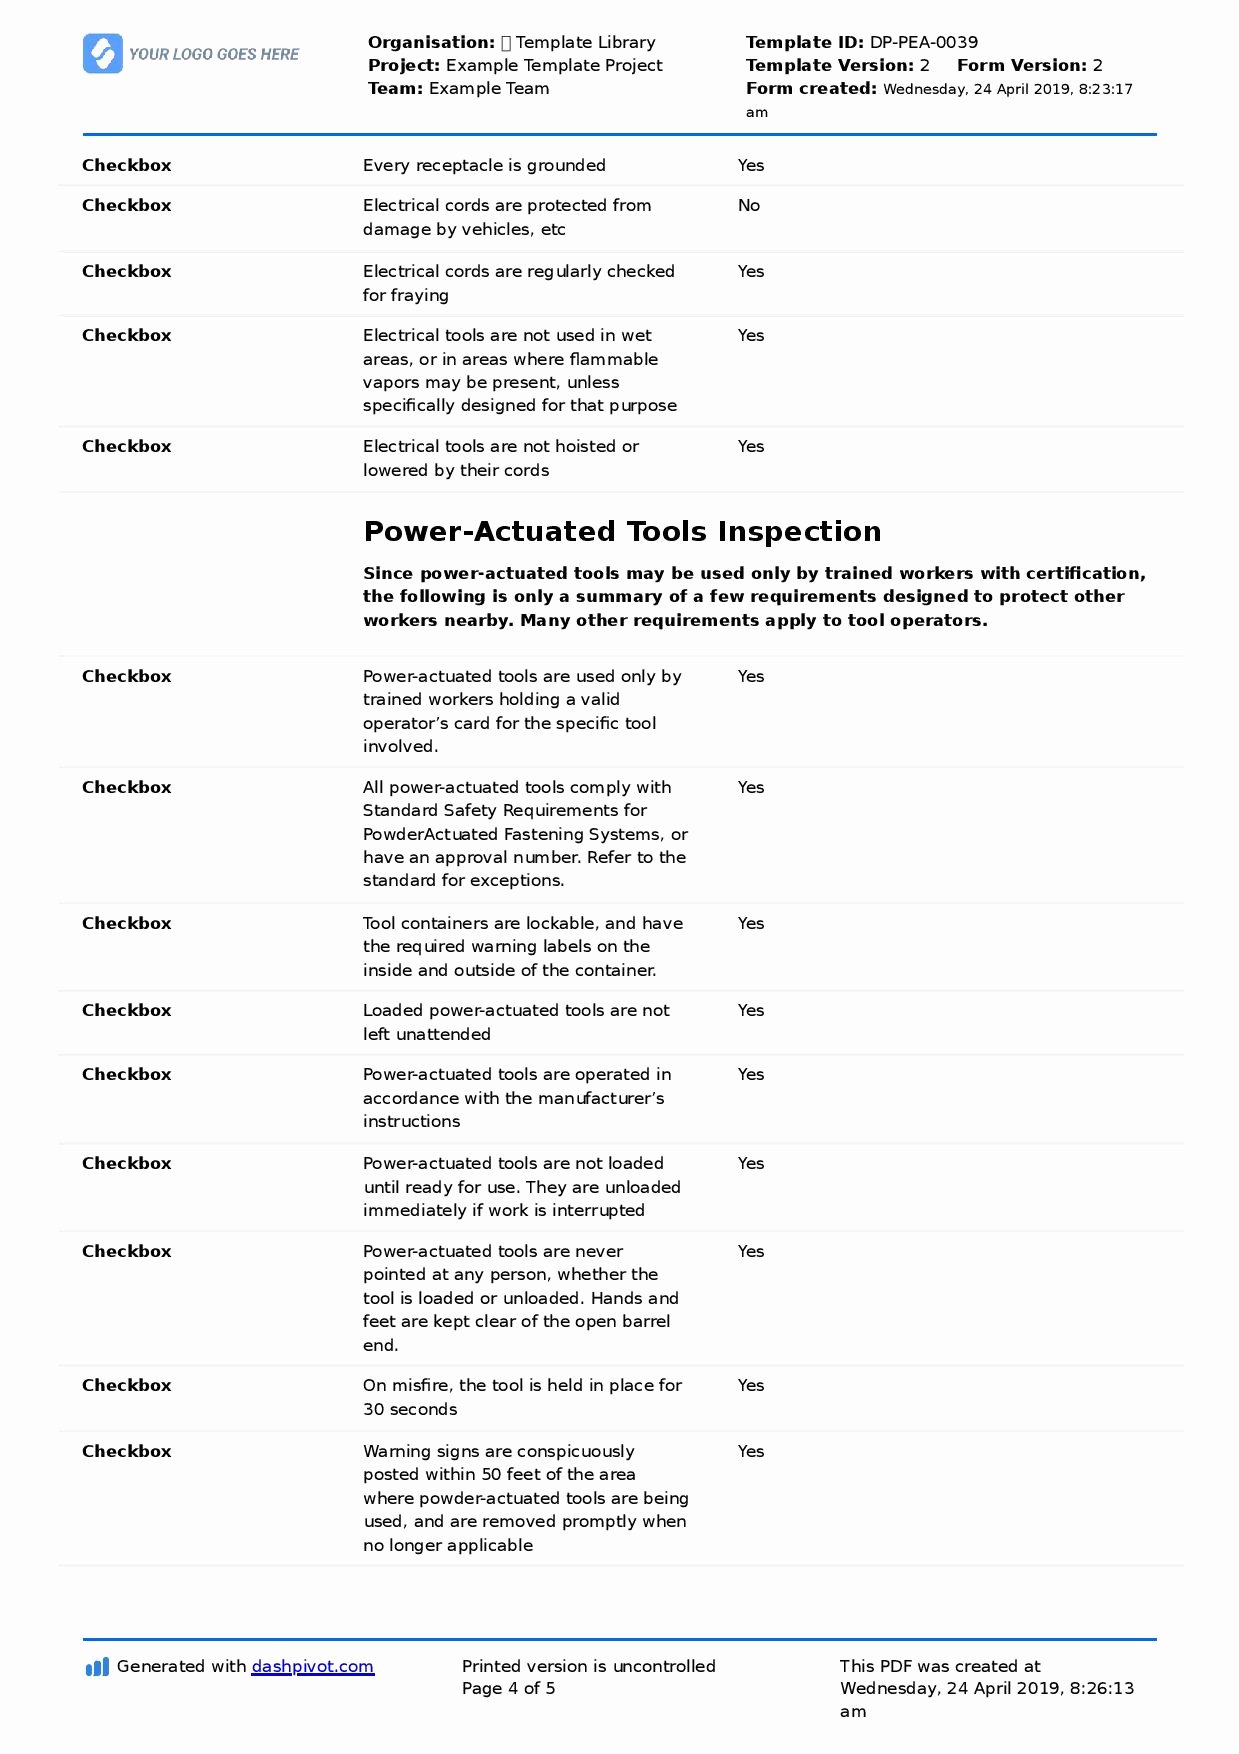 Electrical Inspection Report Template New Electrical tool Inspection Checklist Free to Use and Customisable